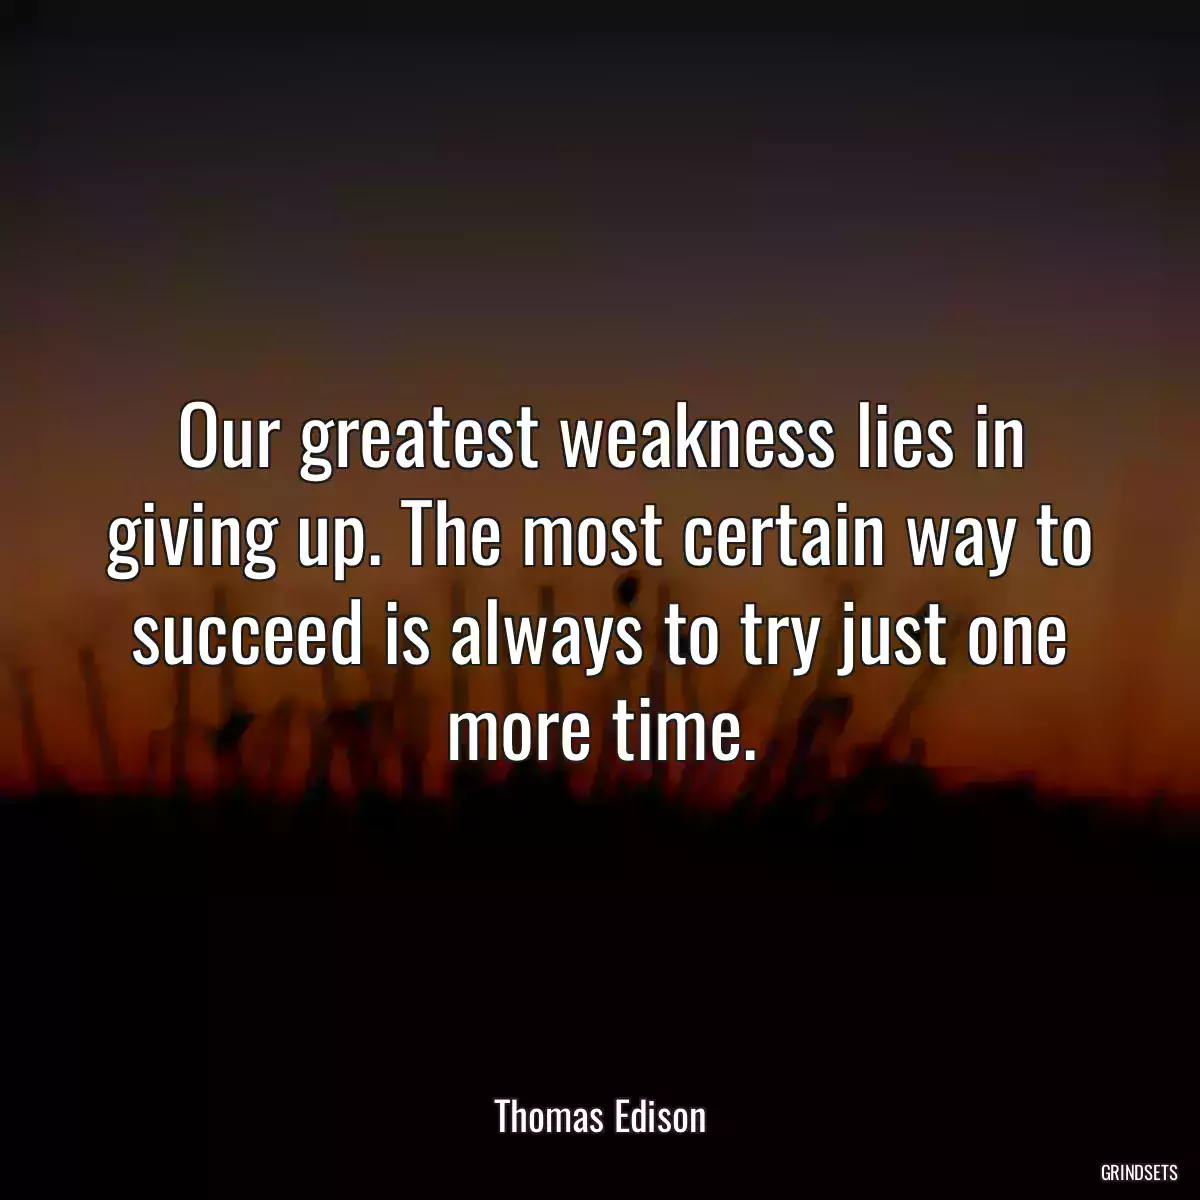 Our greatest weakness lies in giving up. The most certain way to succeed is always to try just one more time.